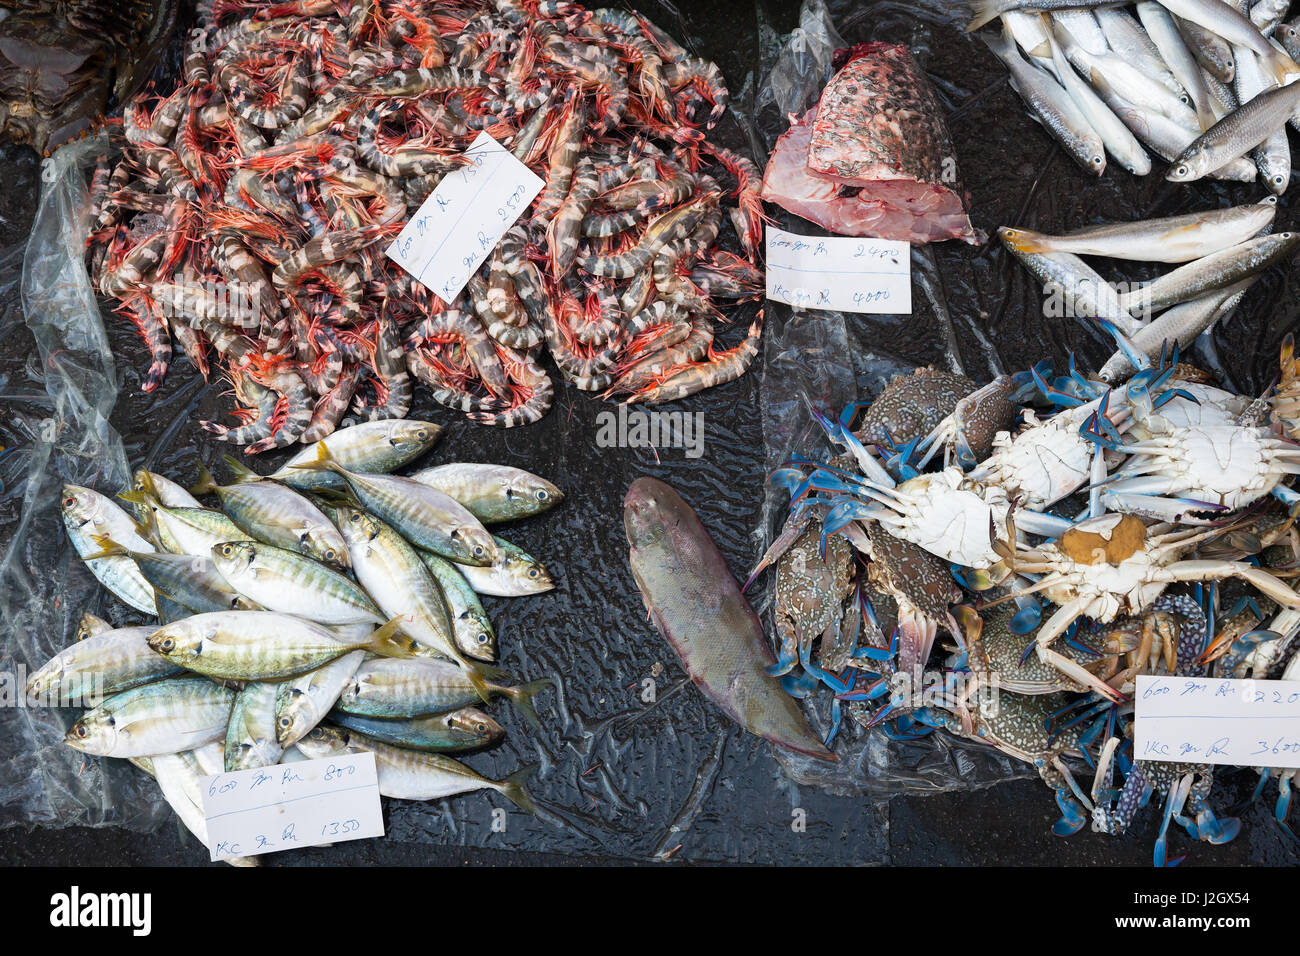 Seafood on the ground at the wet market of George Town, Penang, Malaysia. Stock Photo